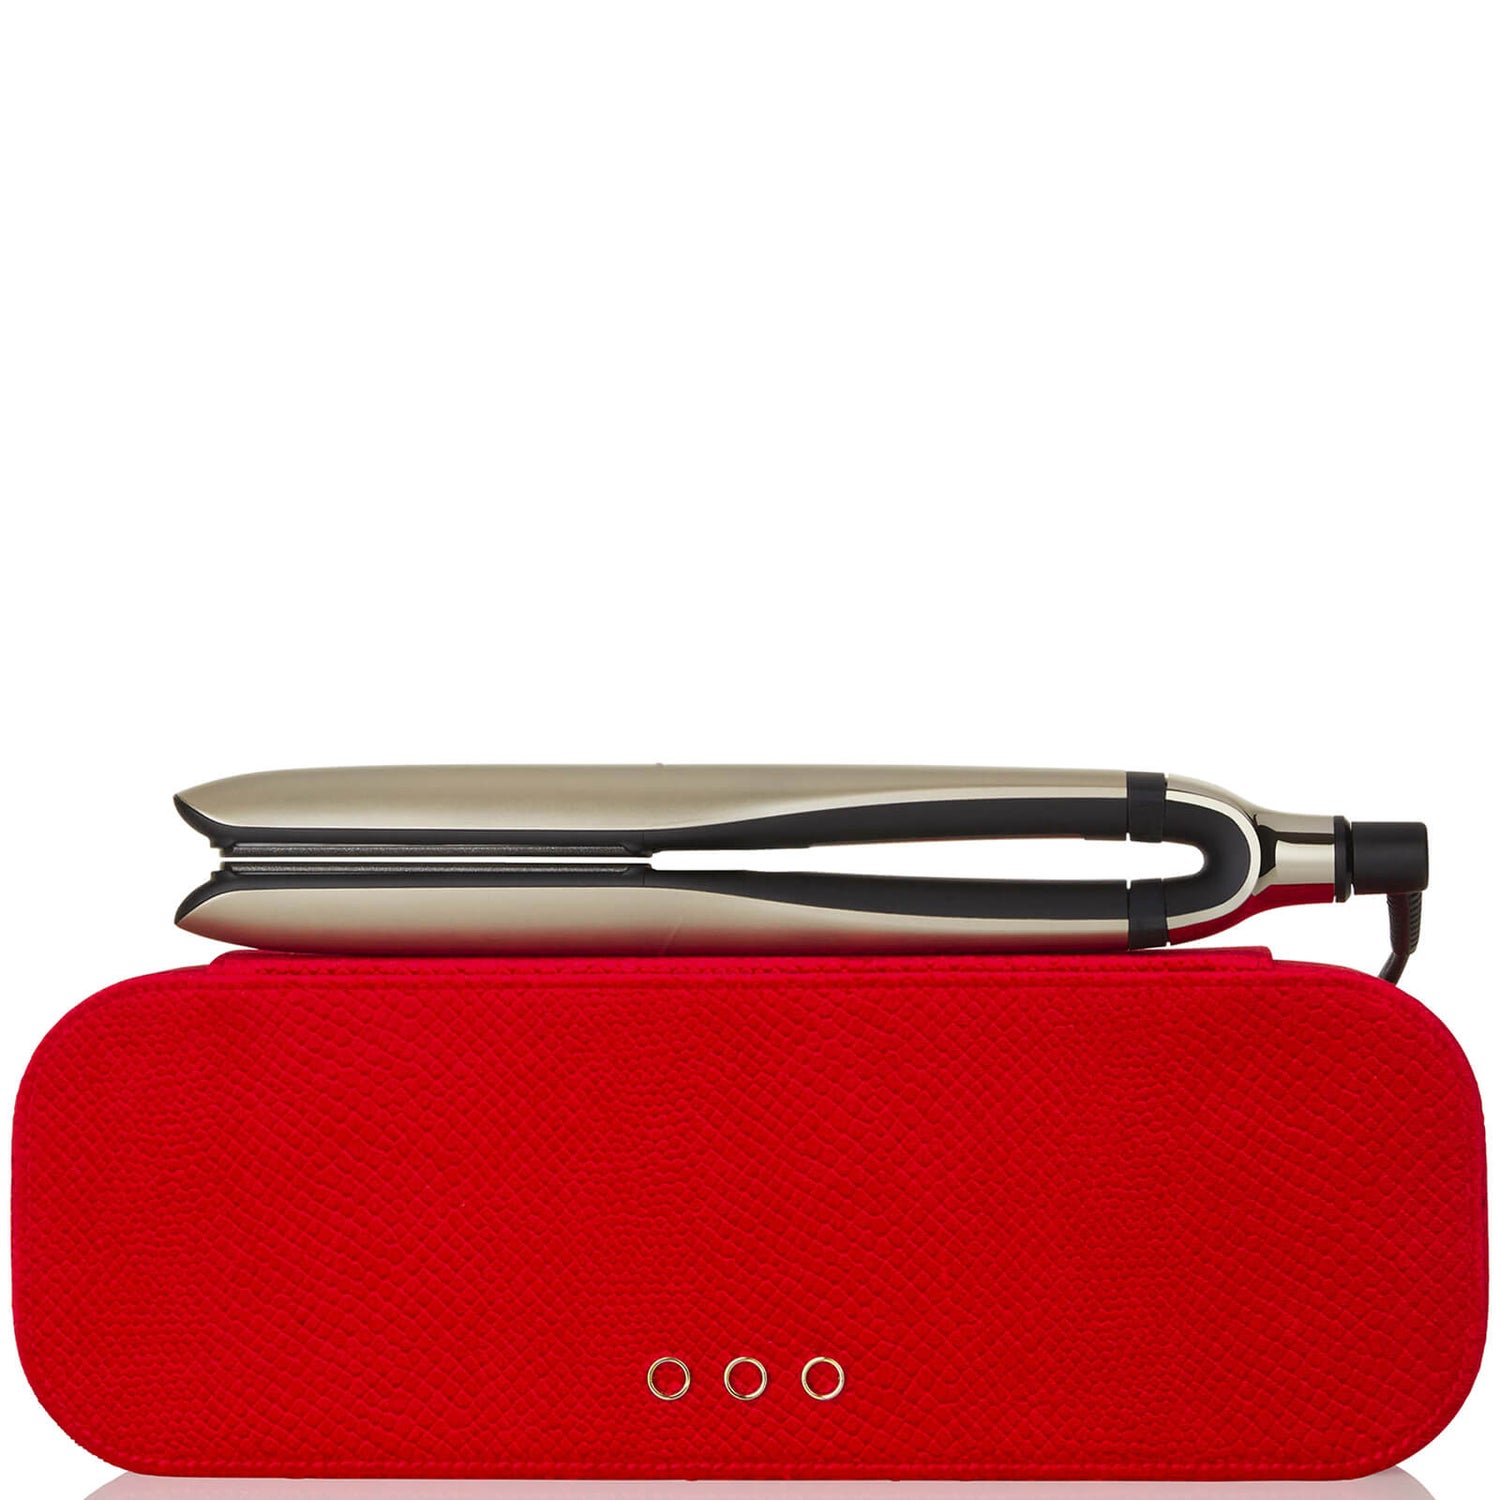 ghd Platinum+ Styler - 1" Flat Iron, Grand-Luxe Collection